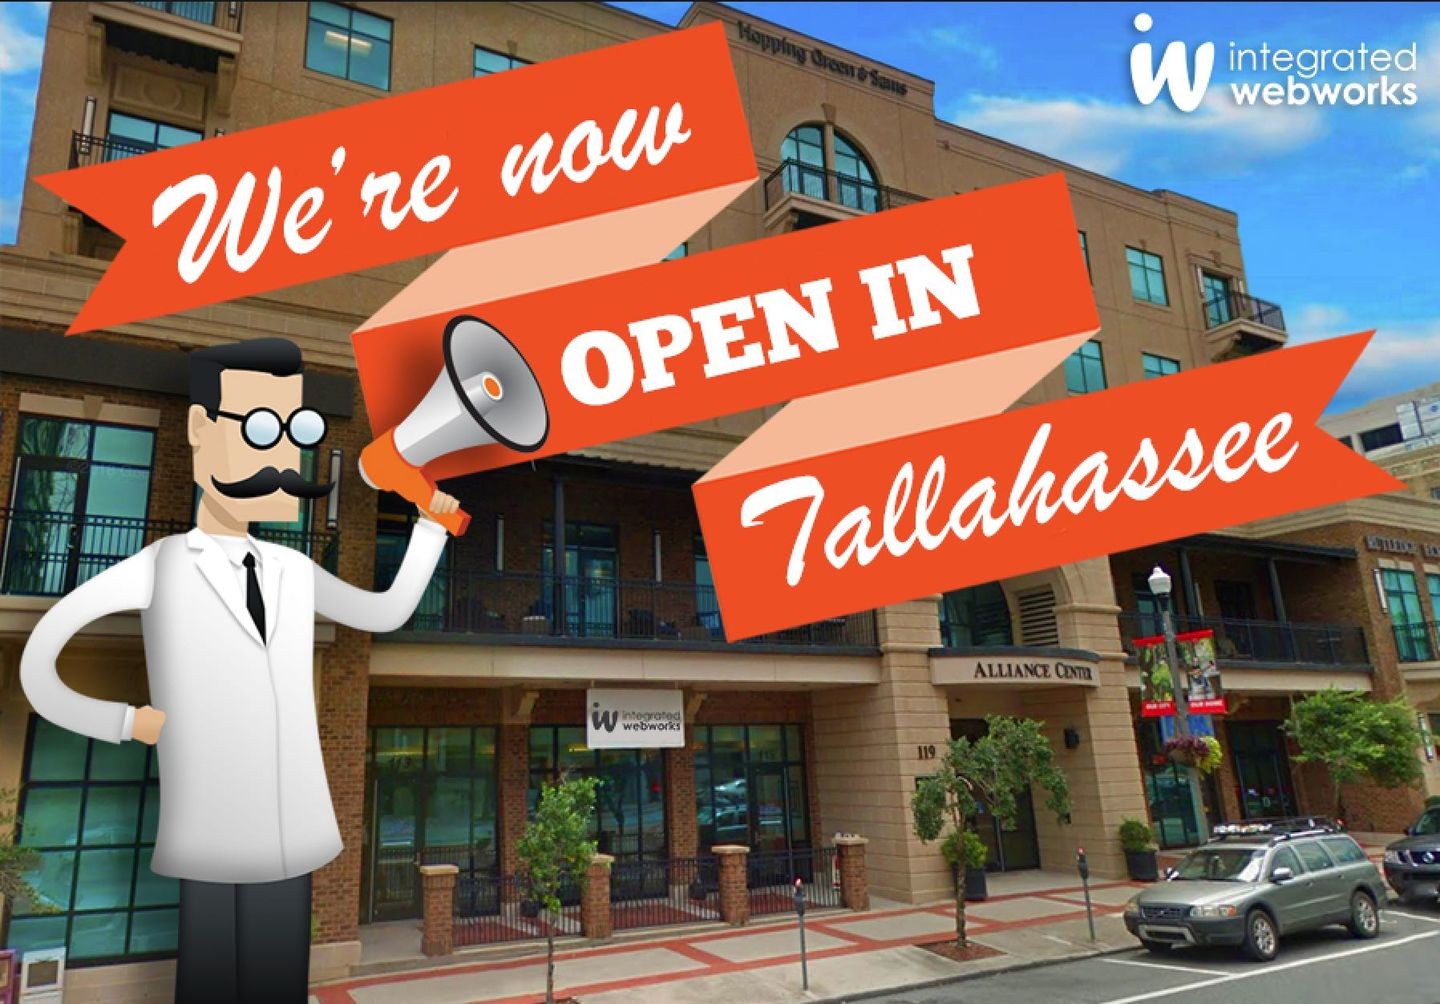 Integrated Webworks is Expanding into Tallahassee